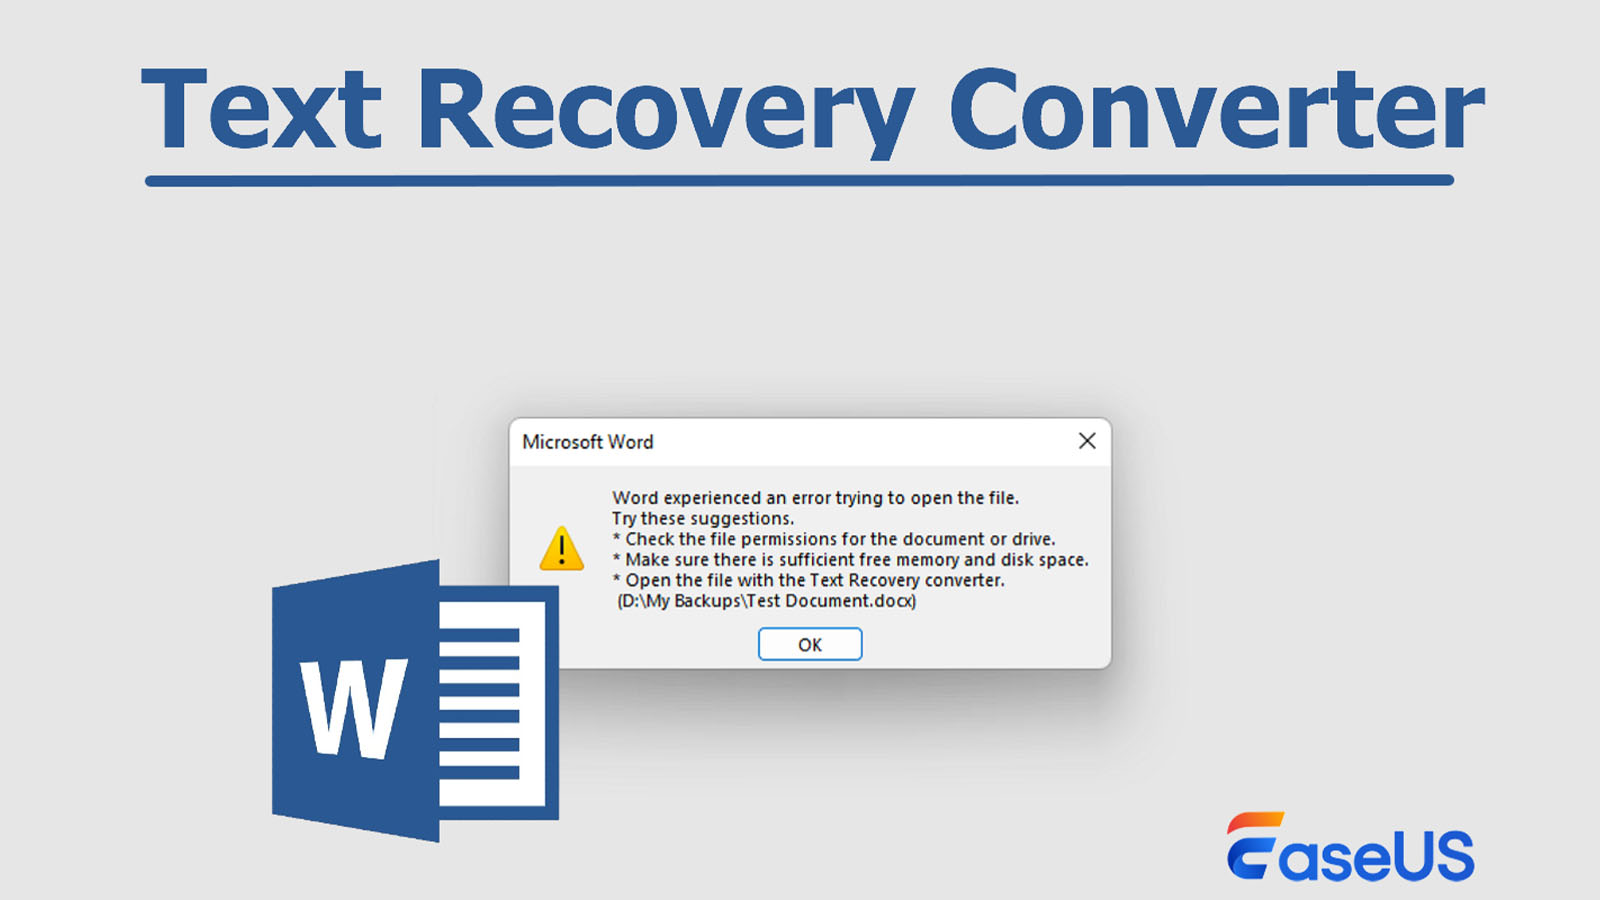 An image depicting text recovery software